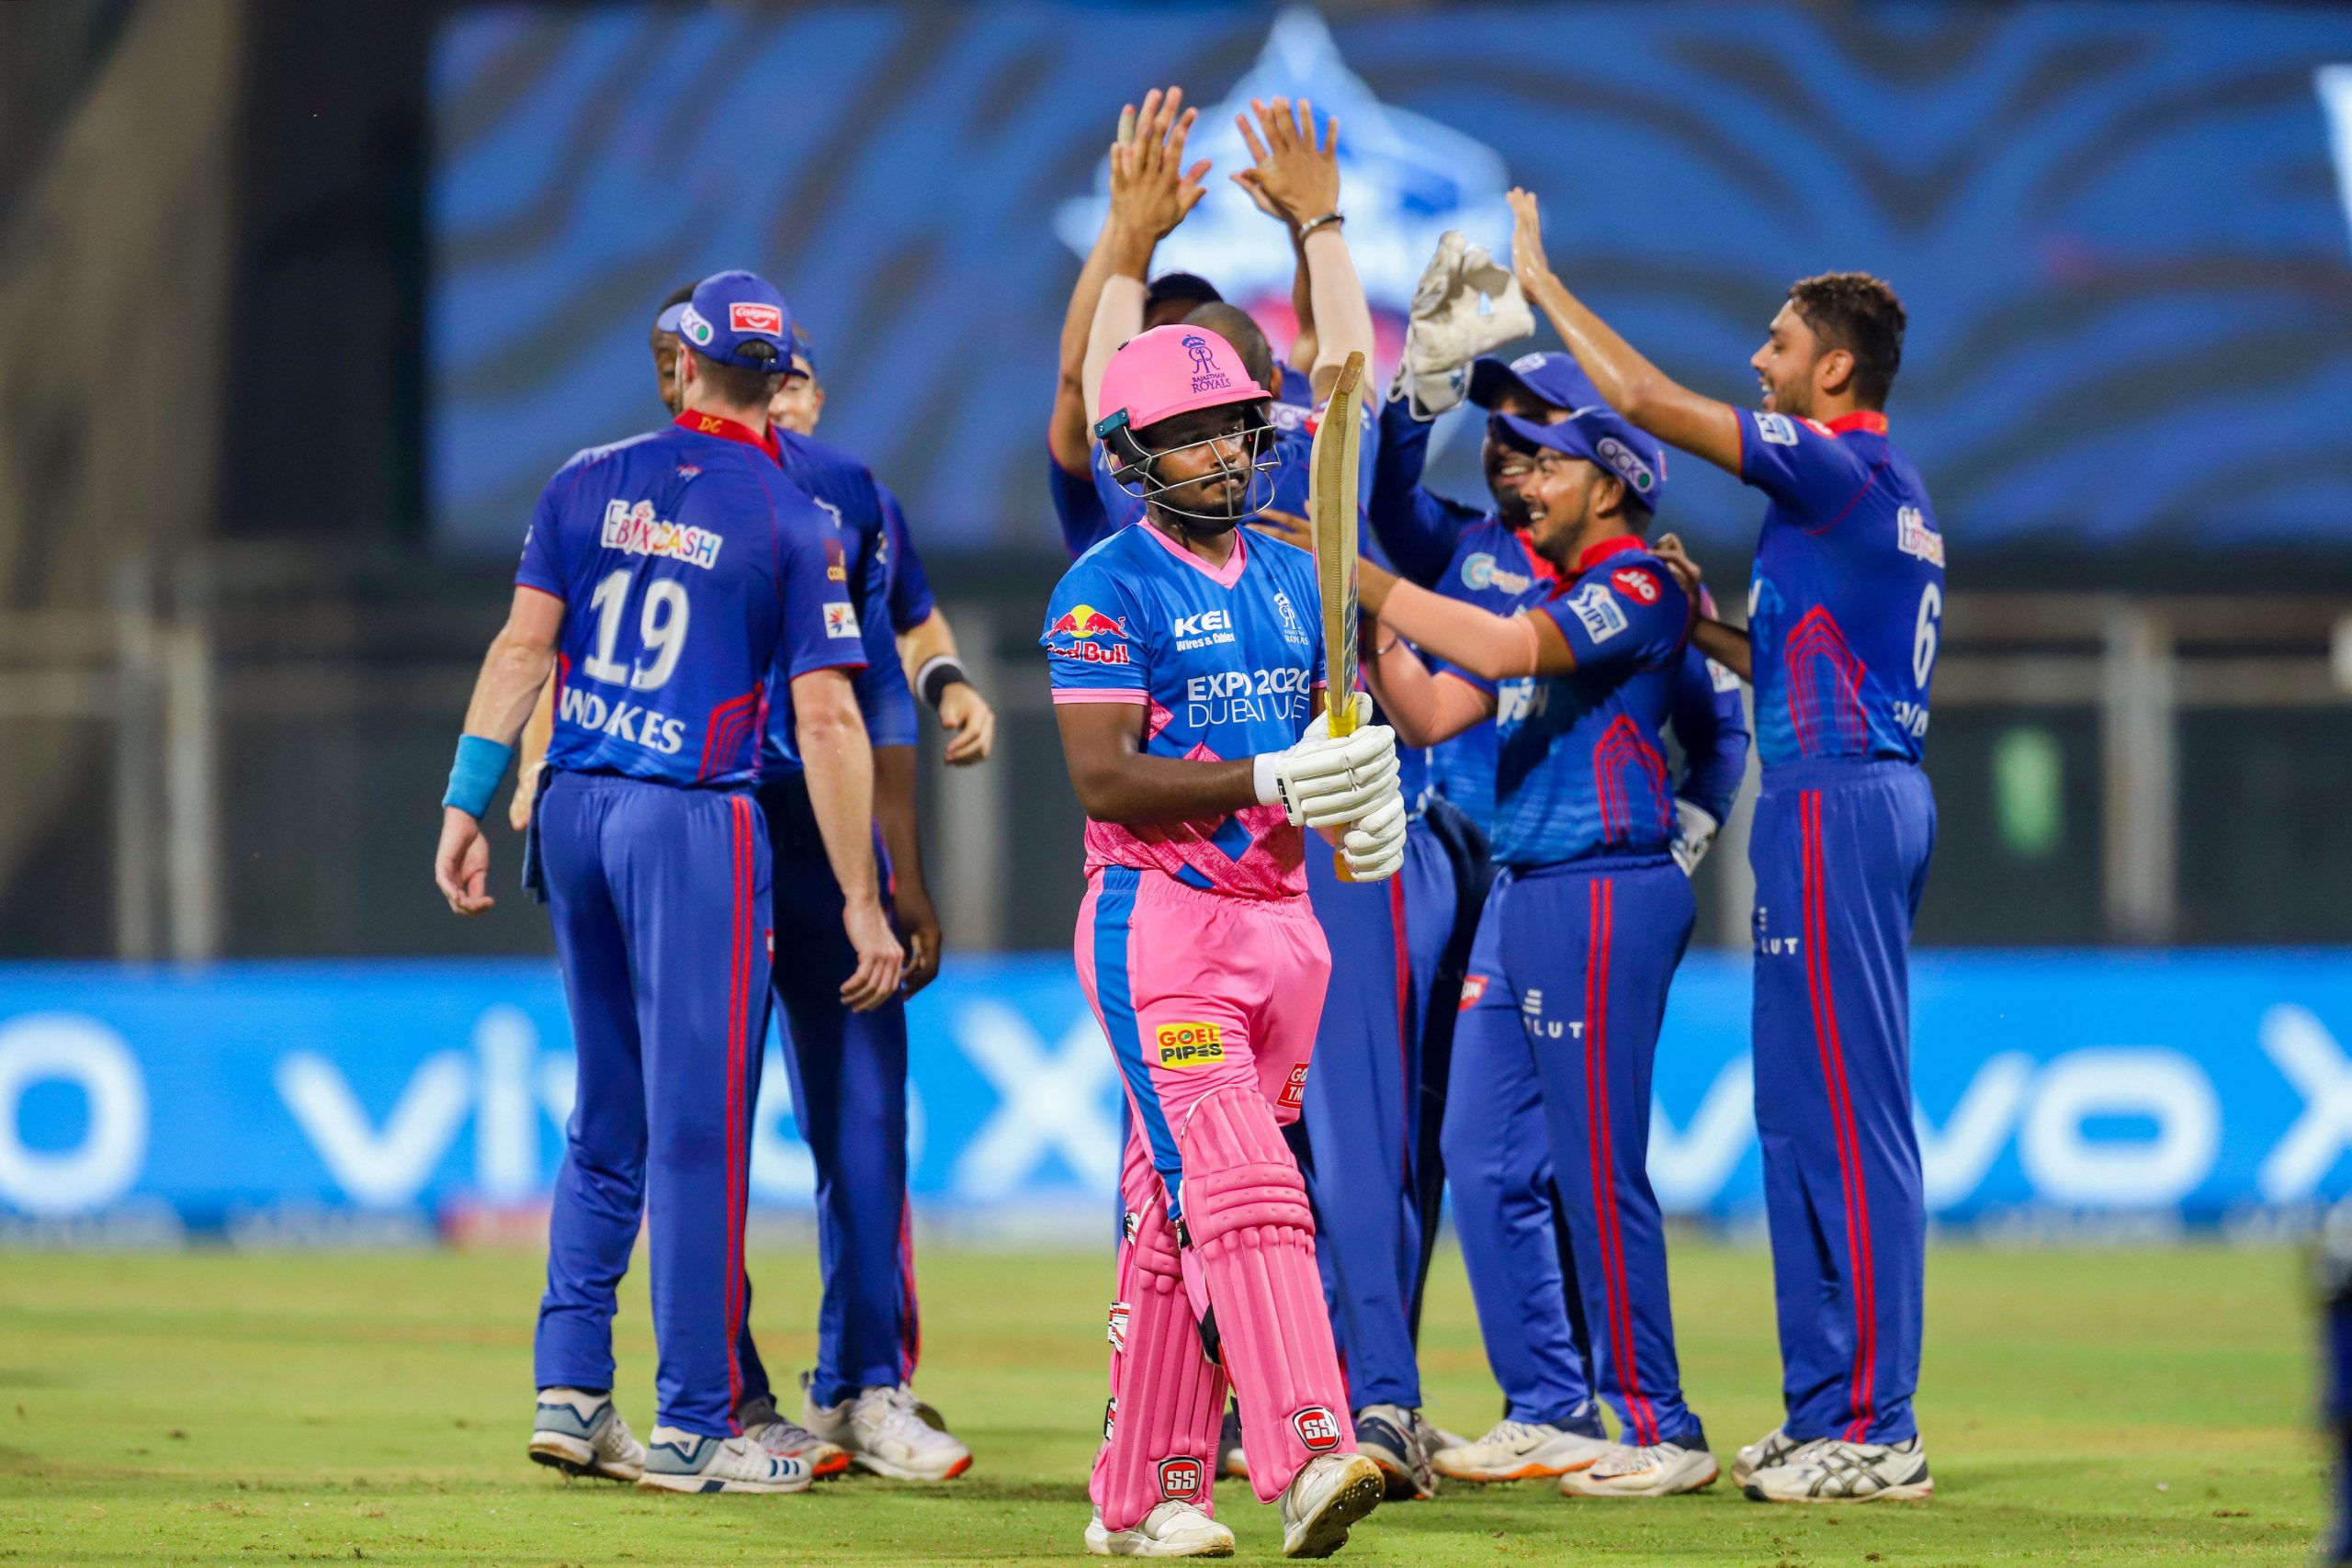 Needed to lift our standards: Sanju Samson after 7-wicket loss to SRH